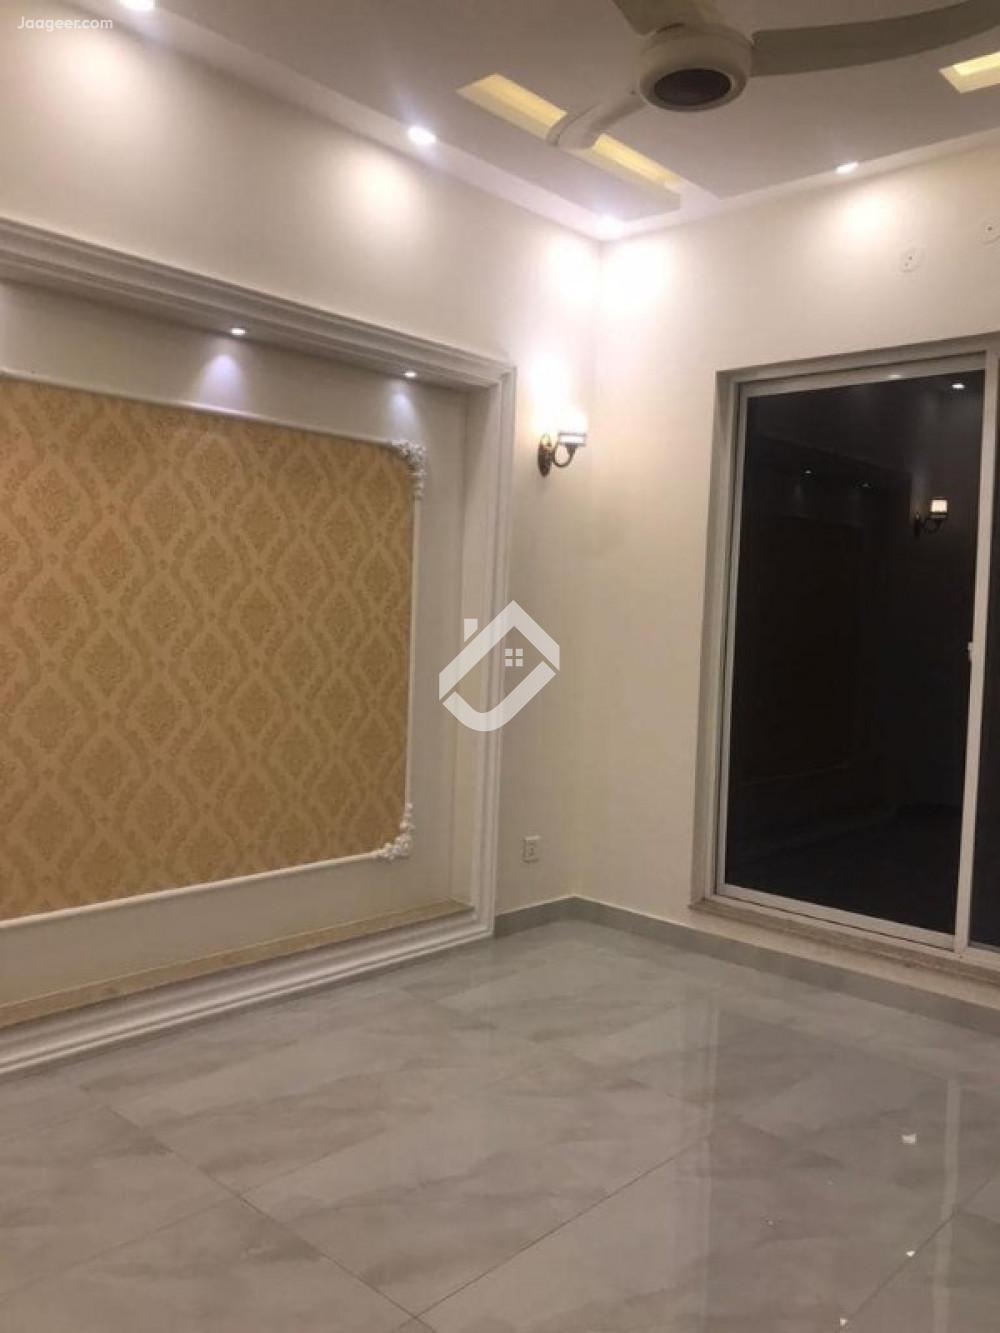 View  5 Marla Upper Portion House For Rent In Paragon City  in Paragon City, Lahore